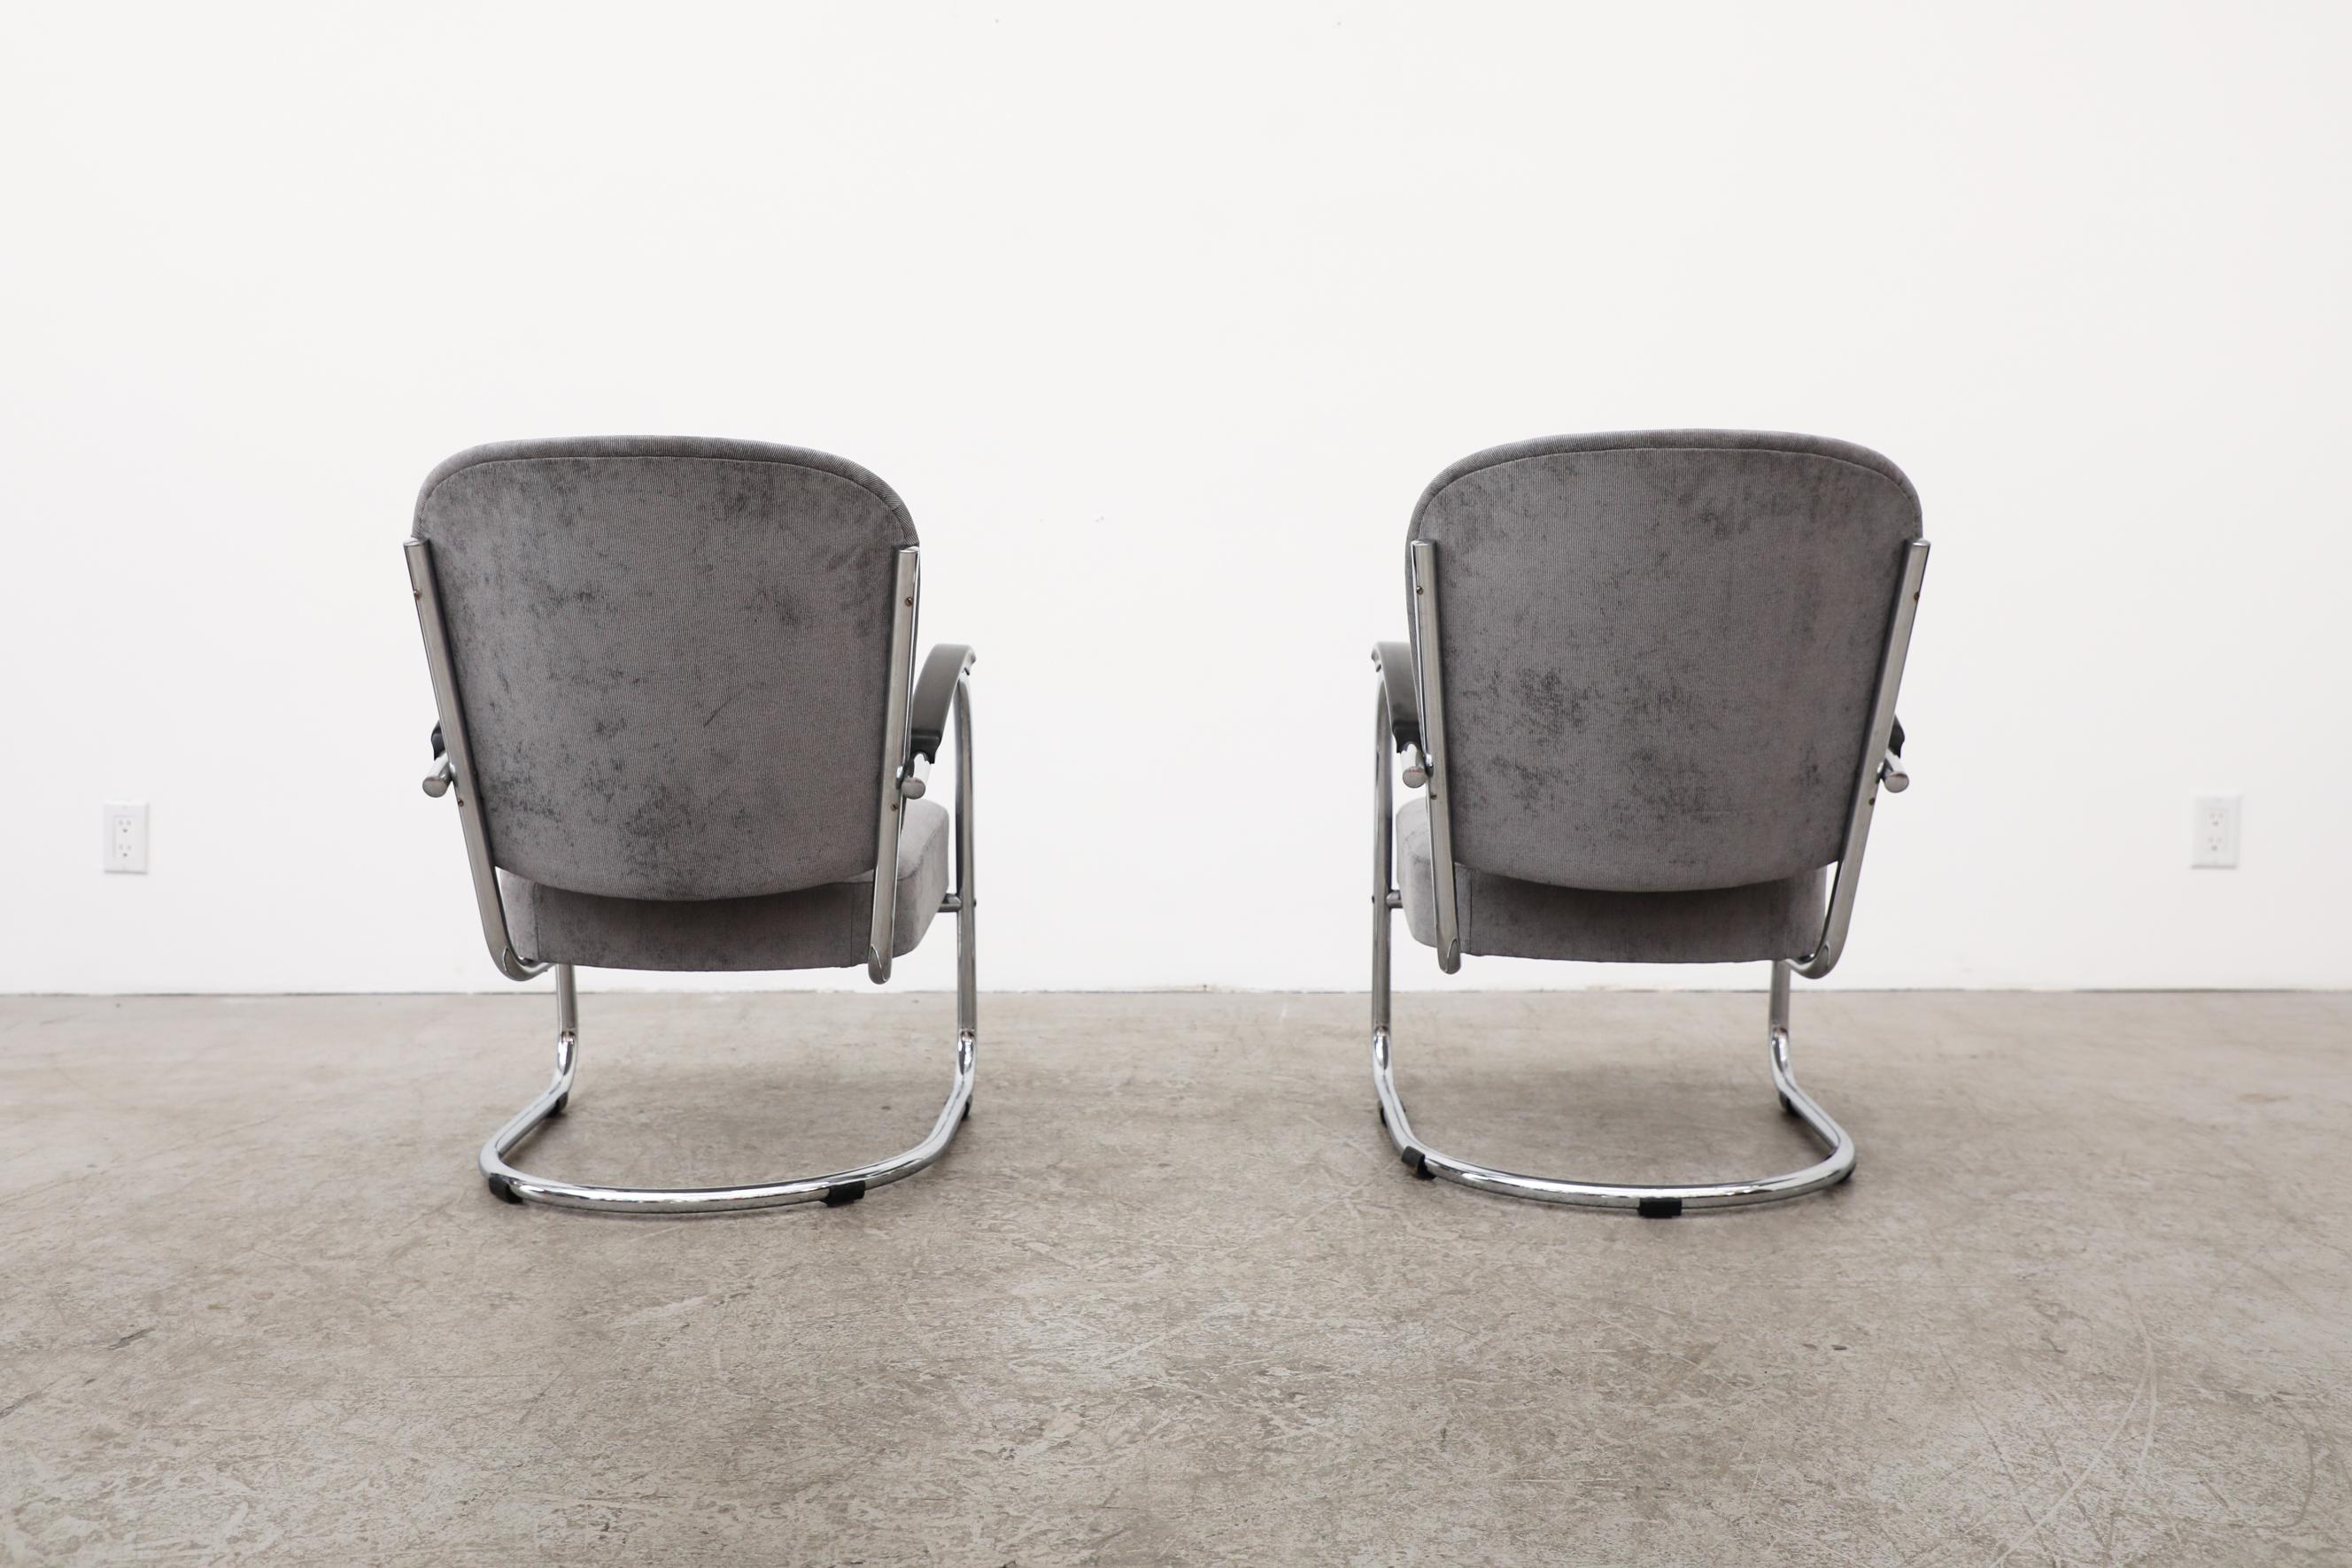 Chrome Pair of Model no. 436 Bauhaus Lounge Chairs by Paul Schuitema, 1930's